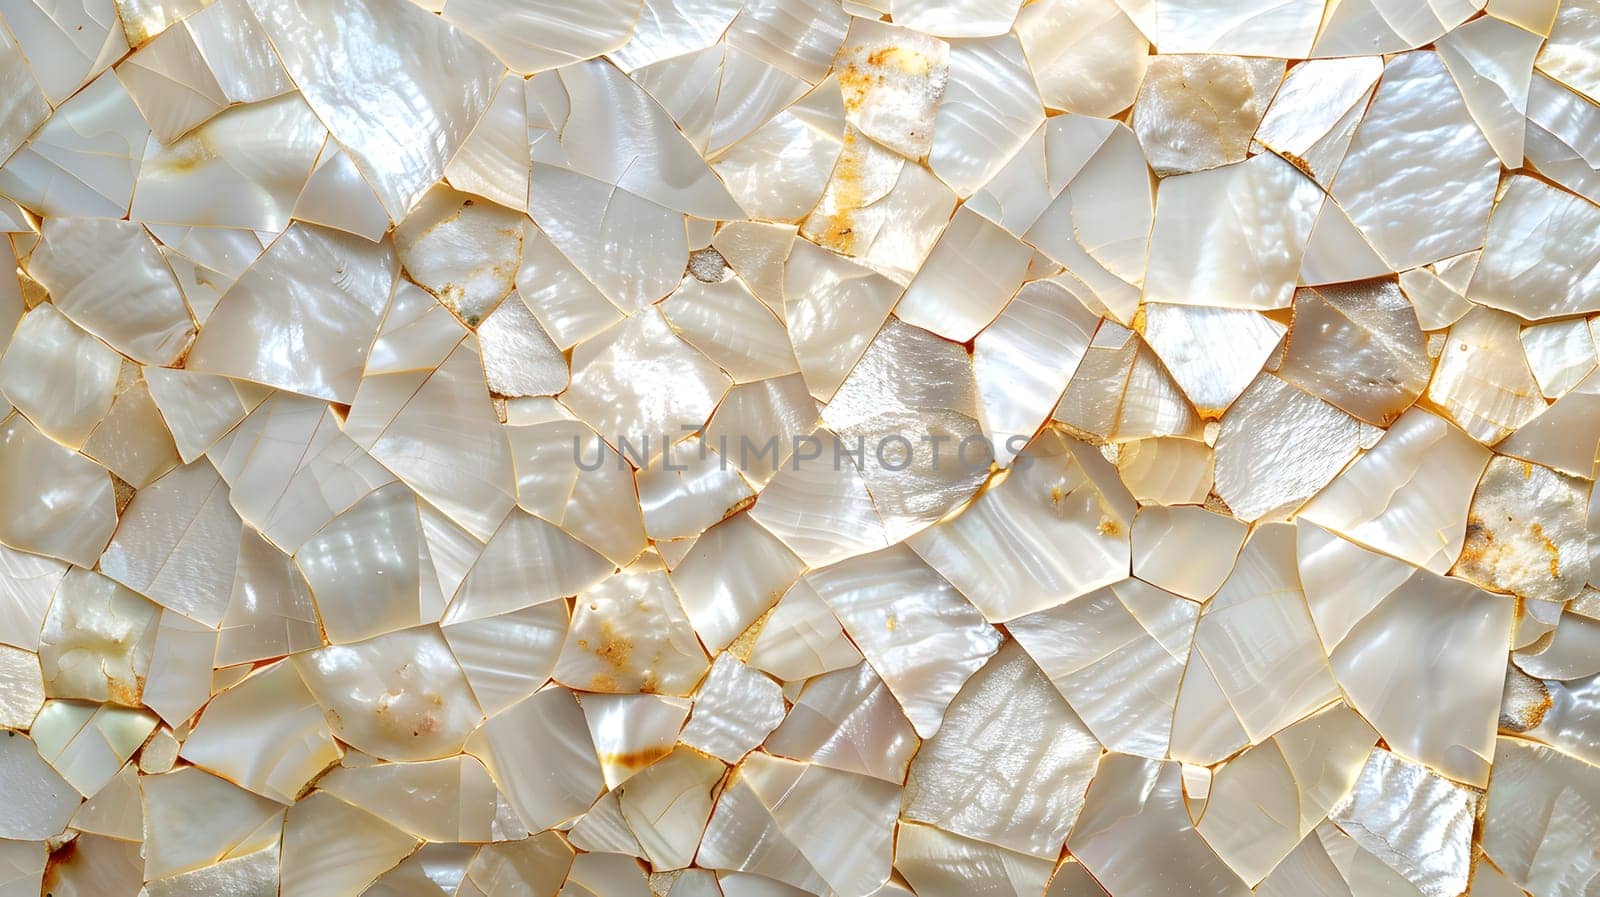 A close up of a piece of white marble, a natural material with a beige pattern. It can be used as a fashion accessory or as a rock ingredient in cuisine dishes